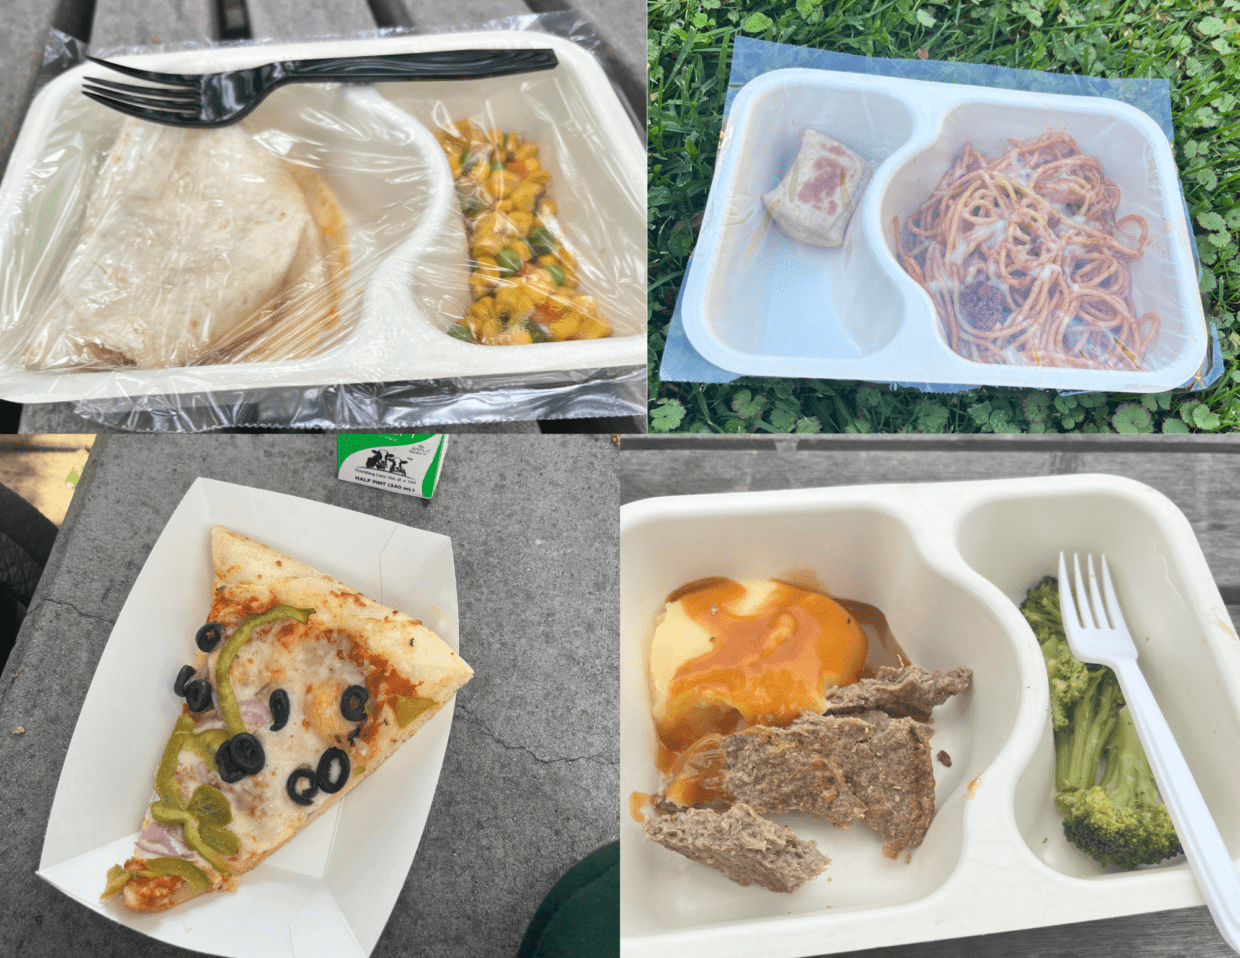 School Lunches: Two Weeks of Food Reviews